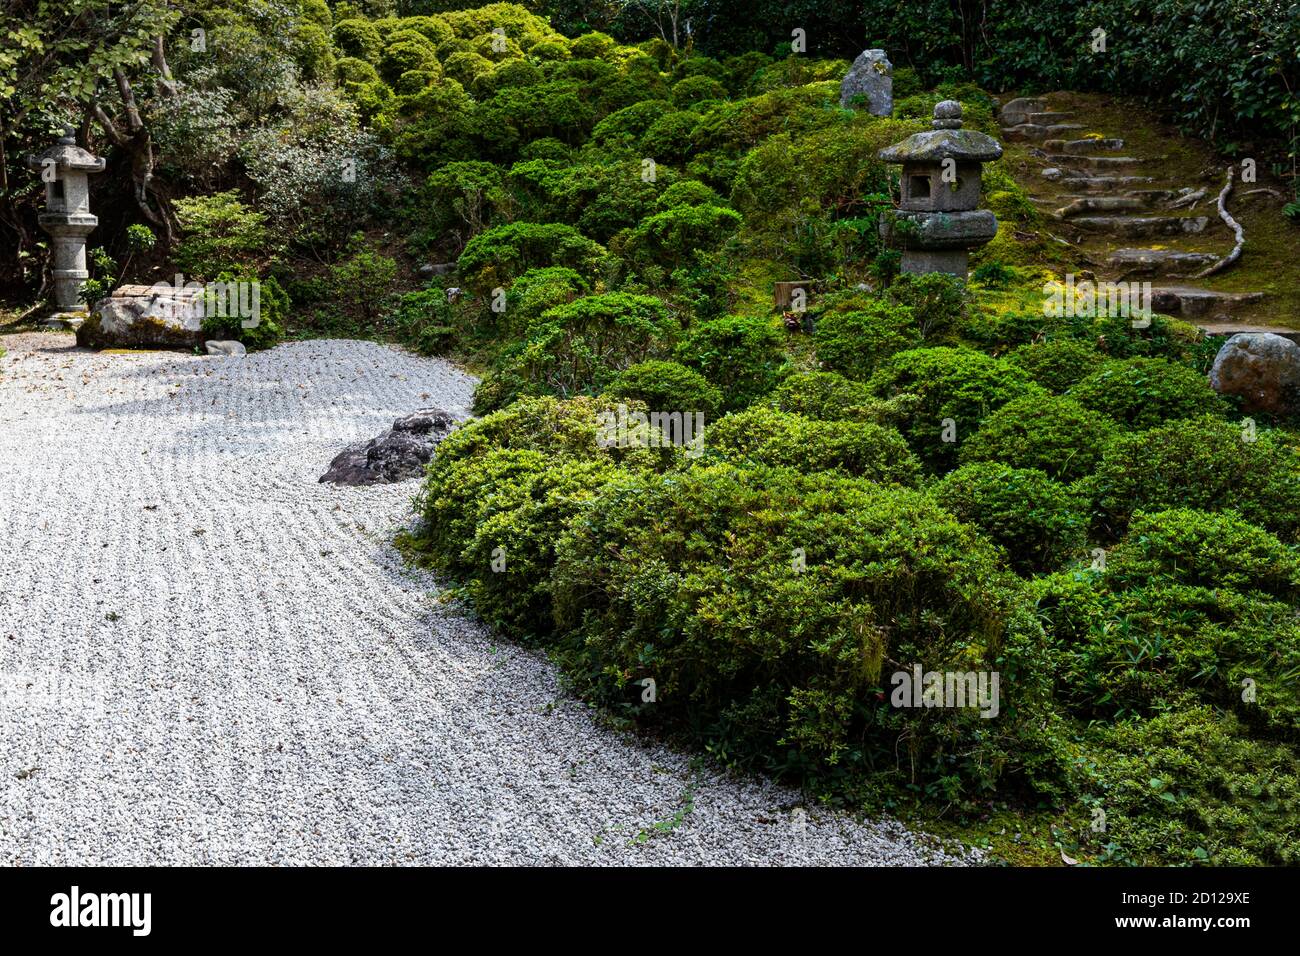 Konpuku-ji Garden consists of two parts, the lower temple and the Basho-an higher up the hill. The temple's zen garden is a classic rock garden with m Stock Photo